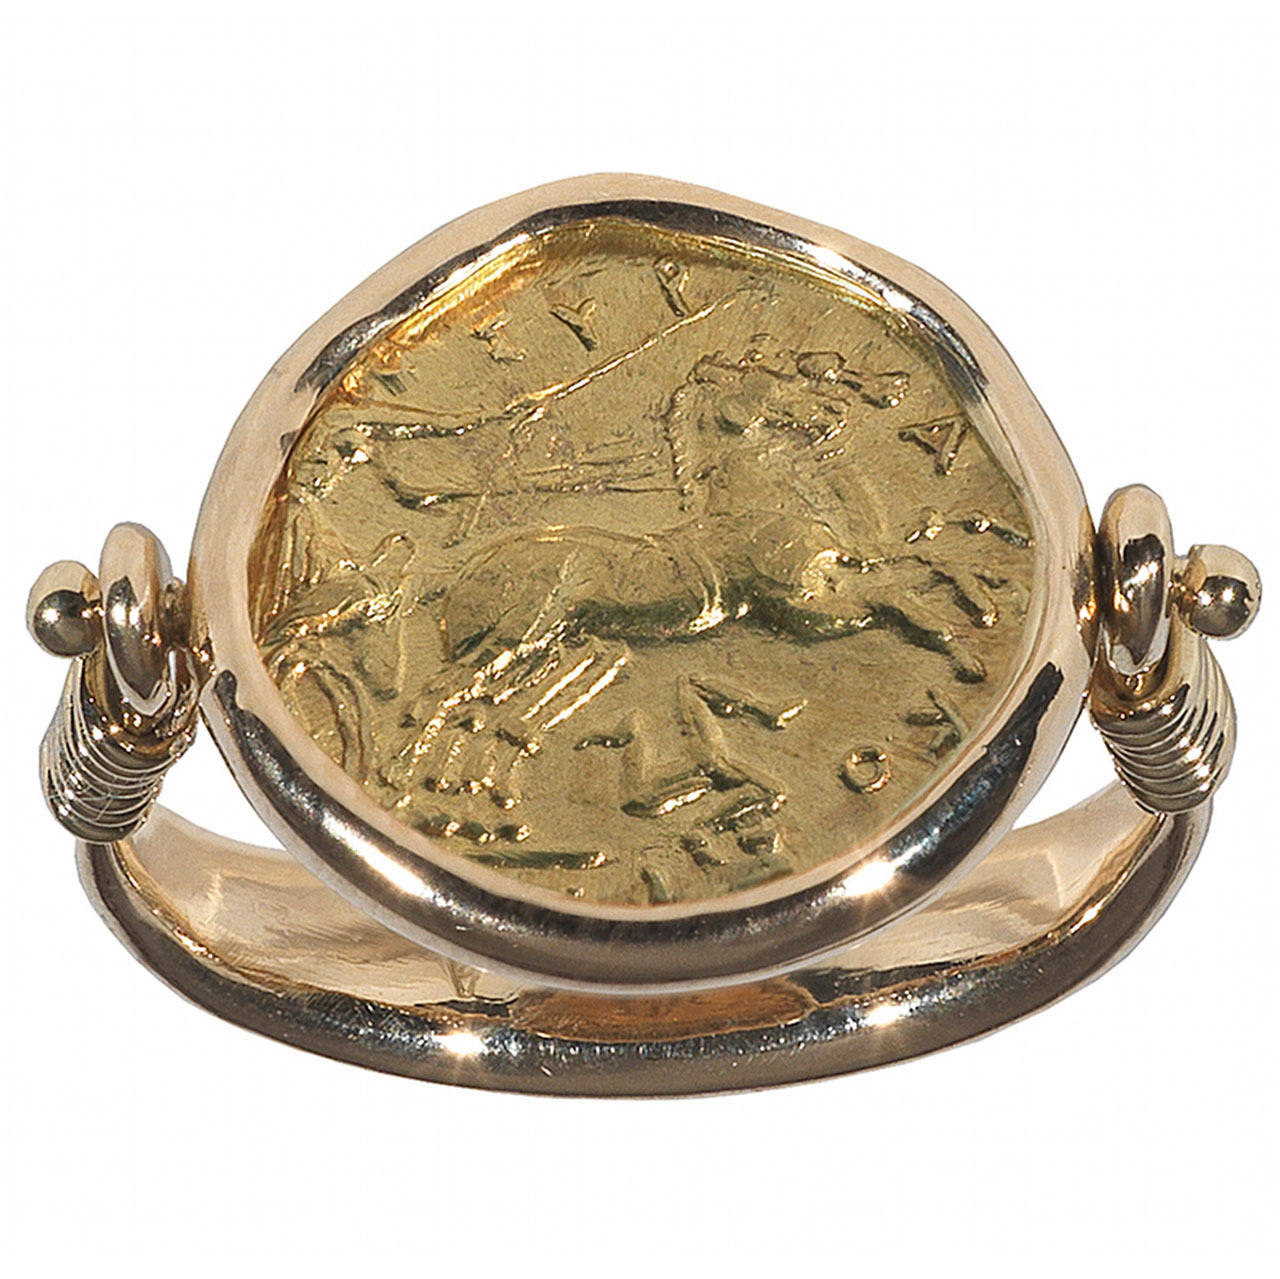 A Gold Swivel Ring Set with a Coin Dekadrachm or 50 Litras of Syracuse